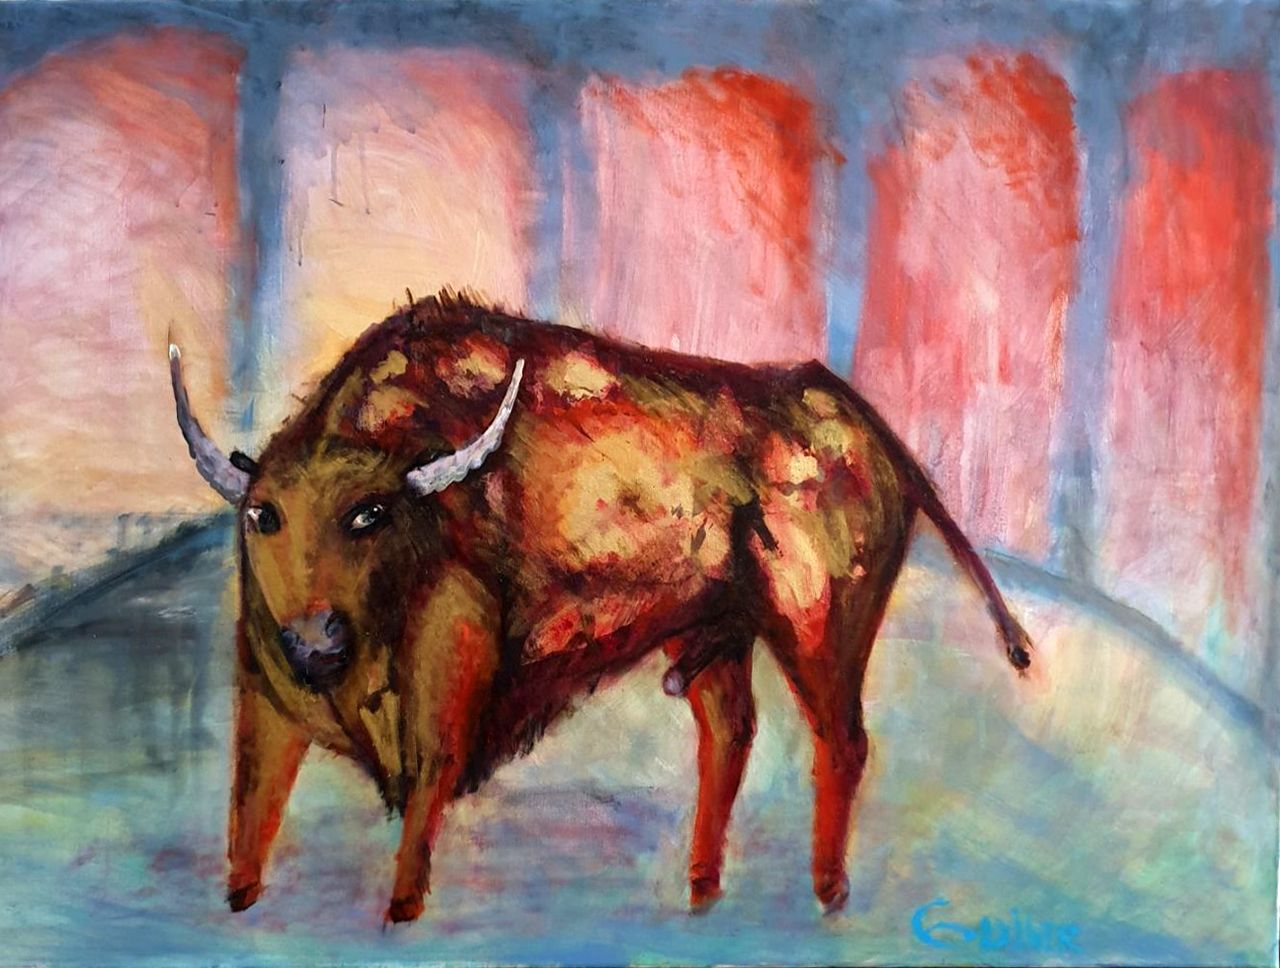 Contemporary painting. Image of a bull. Oil paints and gold leaf are used for the image.